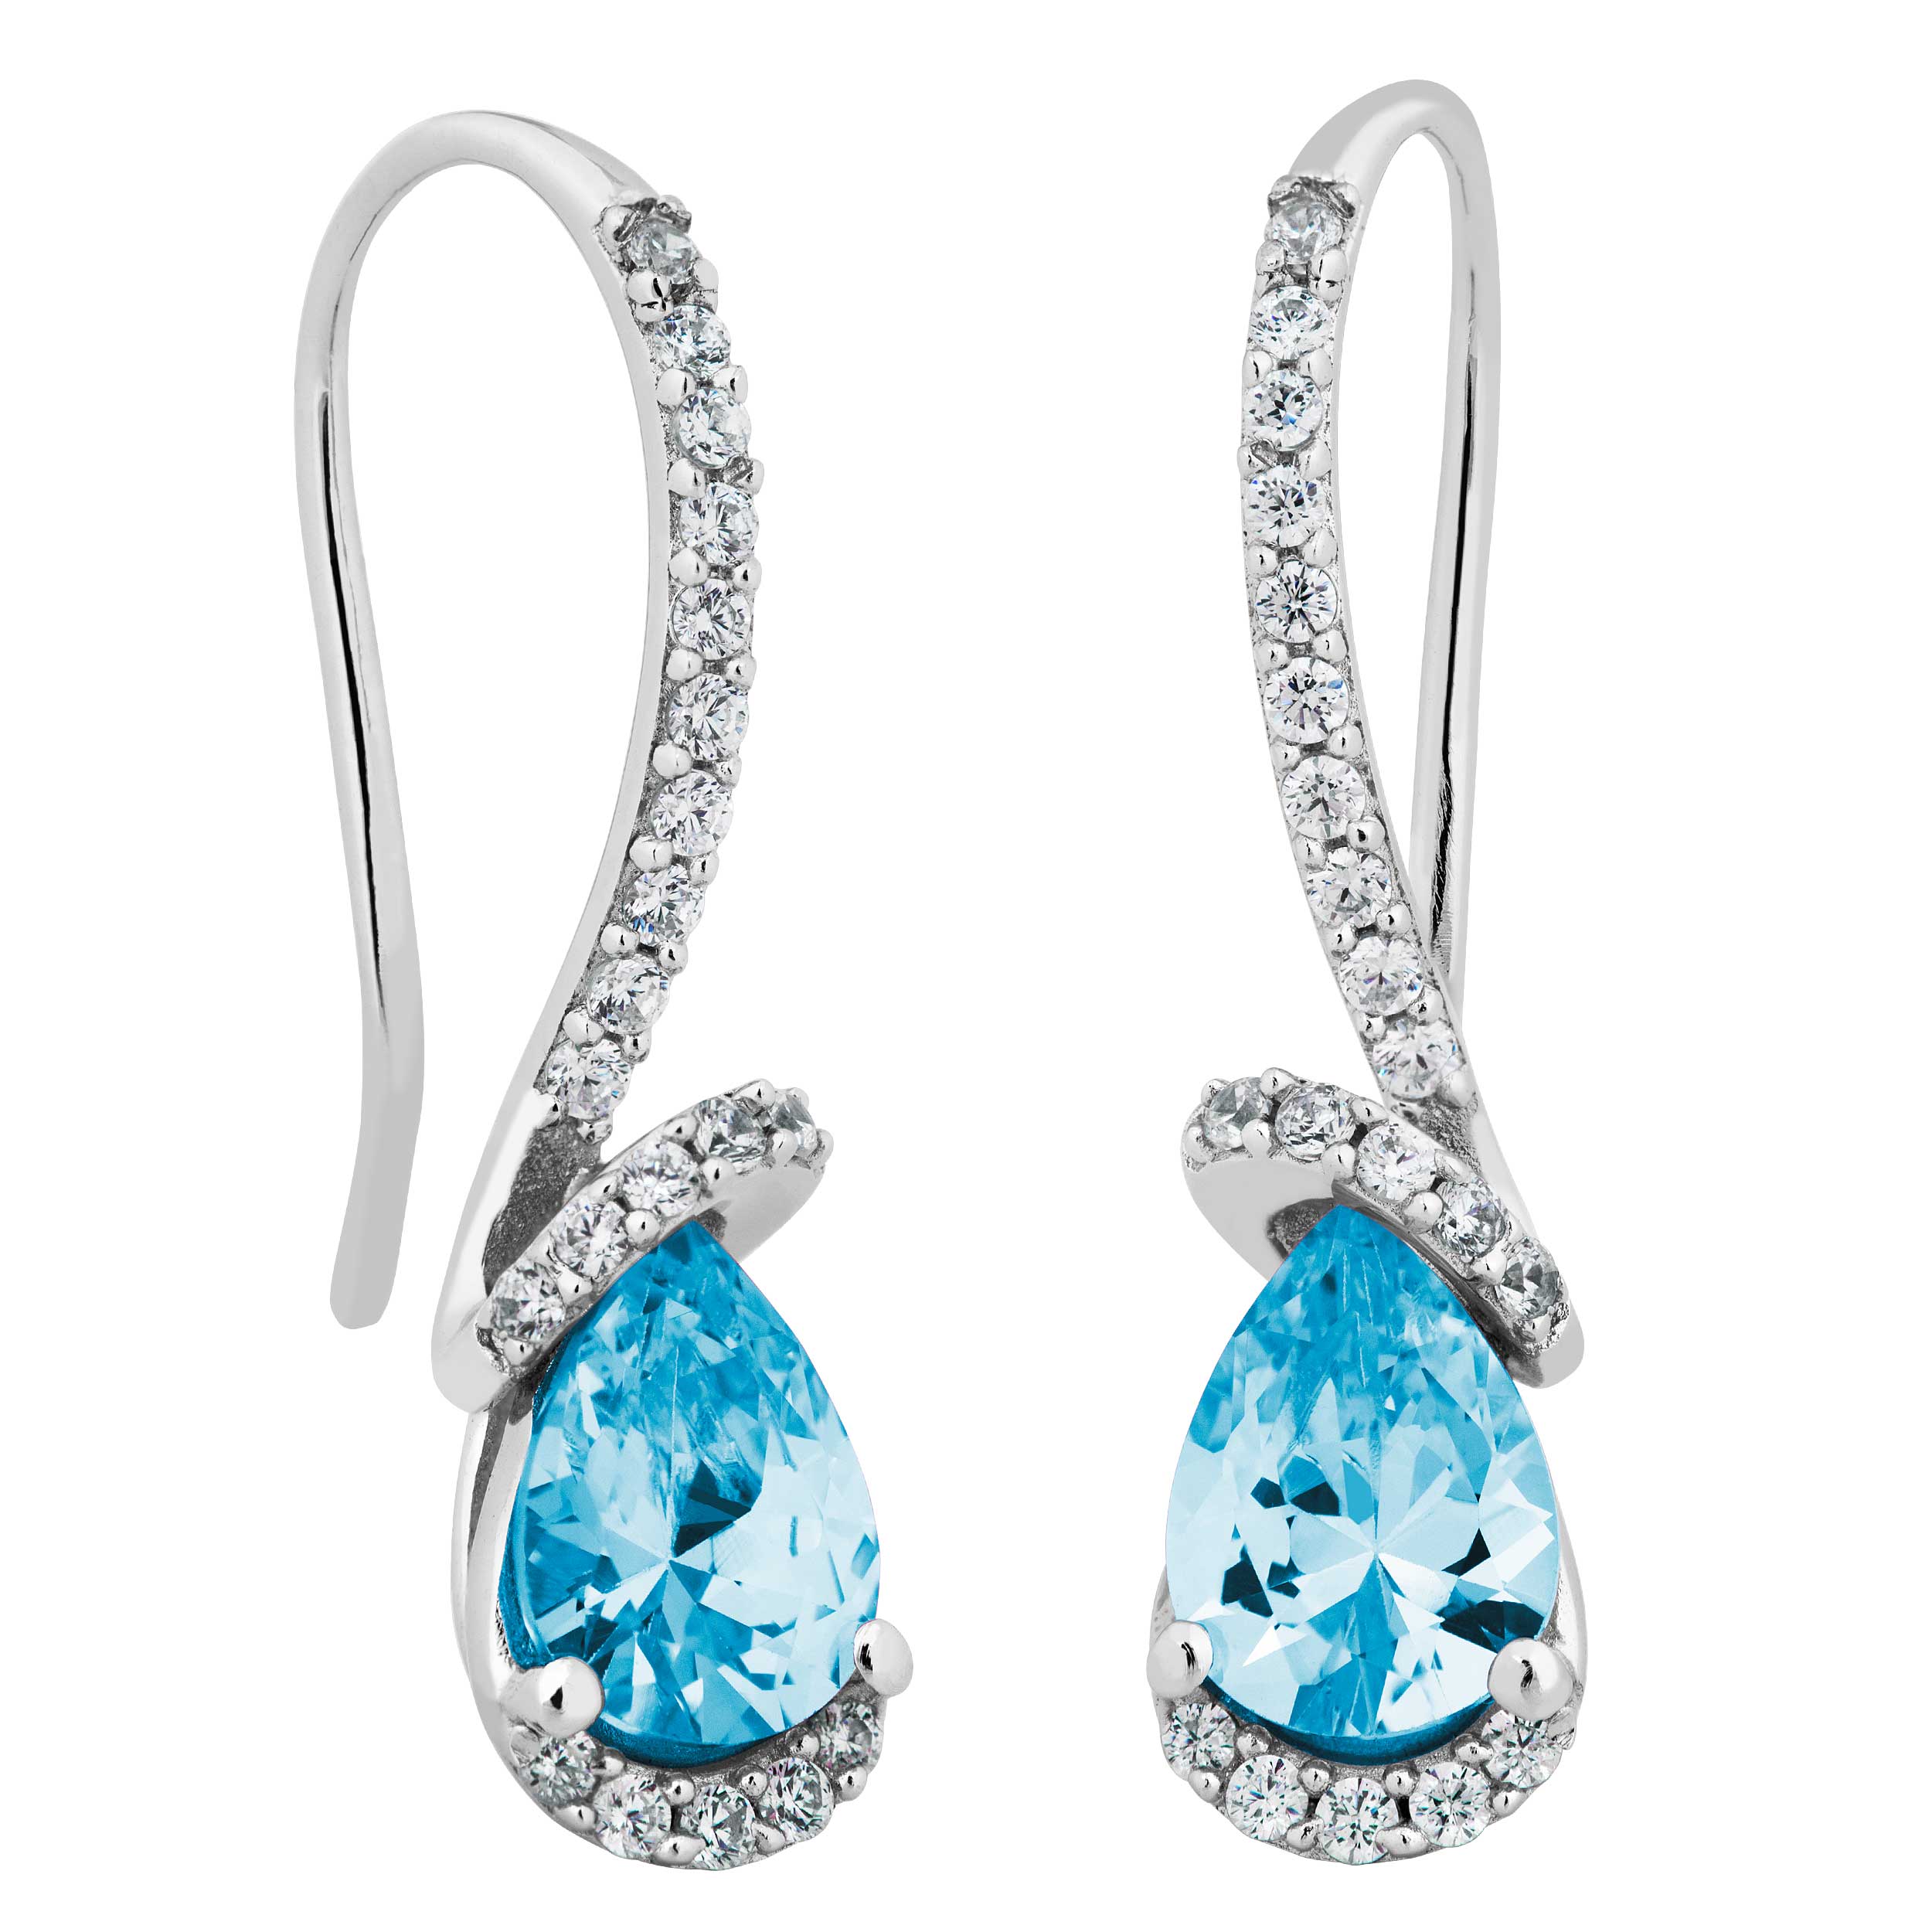 Pear Swiss Blue Topaz and White Topaz Earrings, Rhodium Plated Sterling Silver